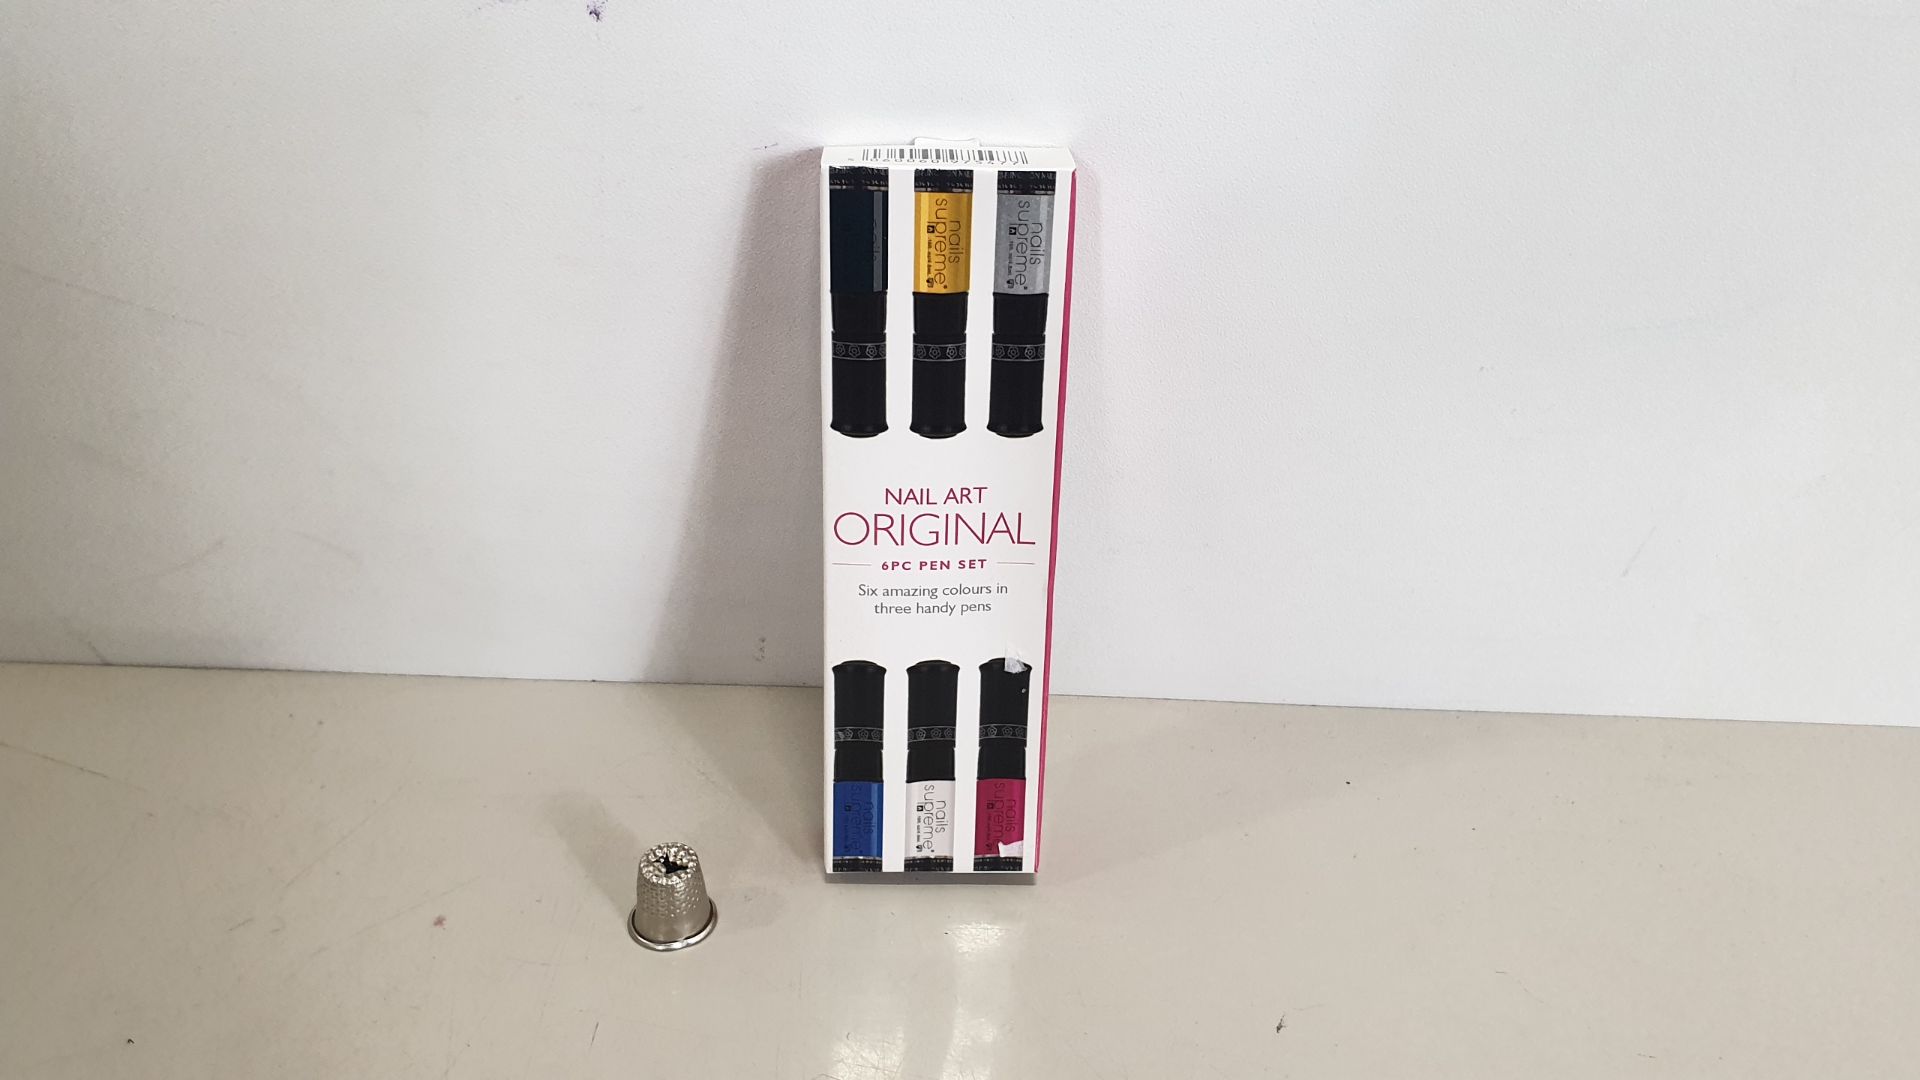 100 X BRAND NEW ORIGINAL NAIL ART 6PC PEN SET (6 AMAZING COLOURS IN 3 HANDY PENS) - IN ONE BOX - RRP